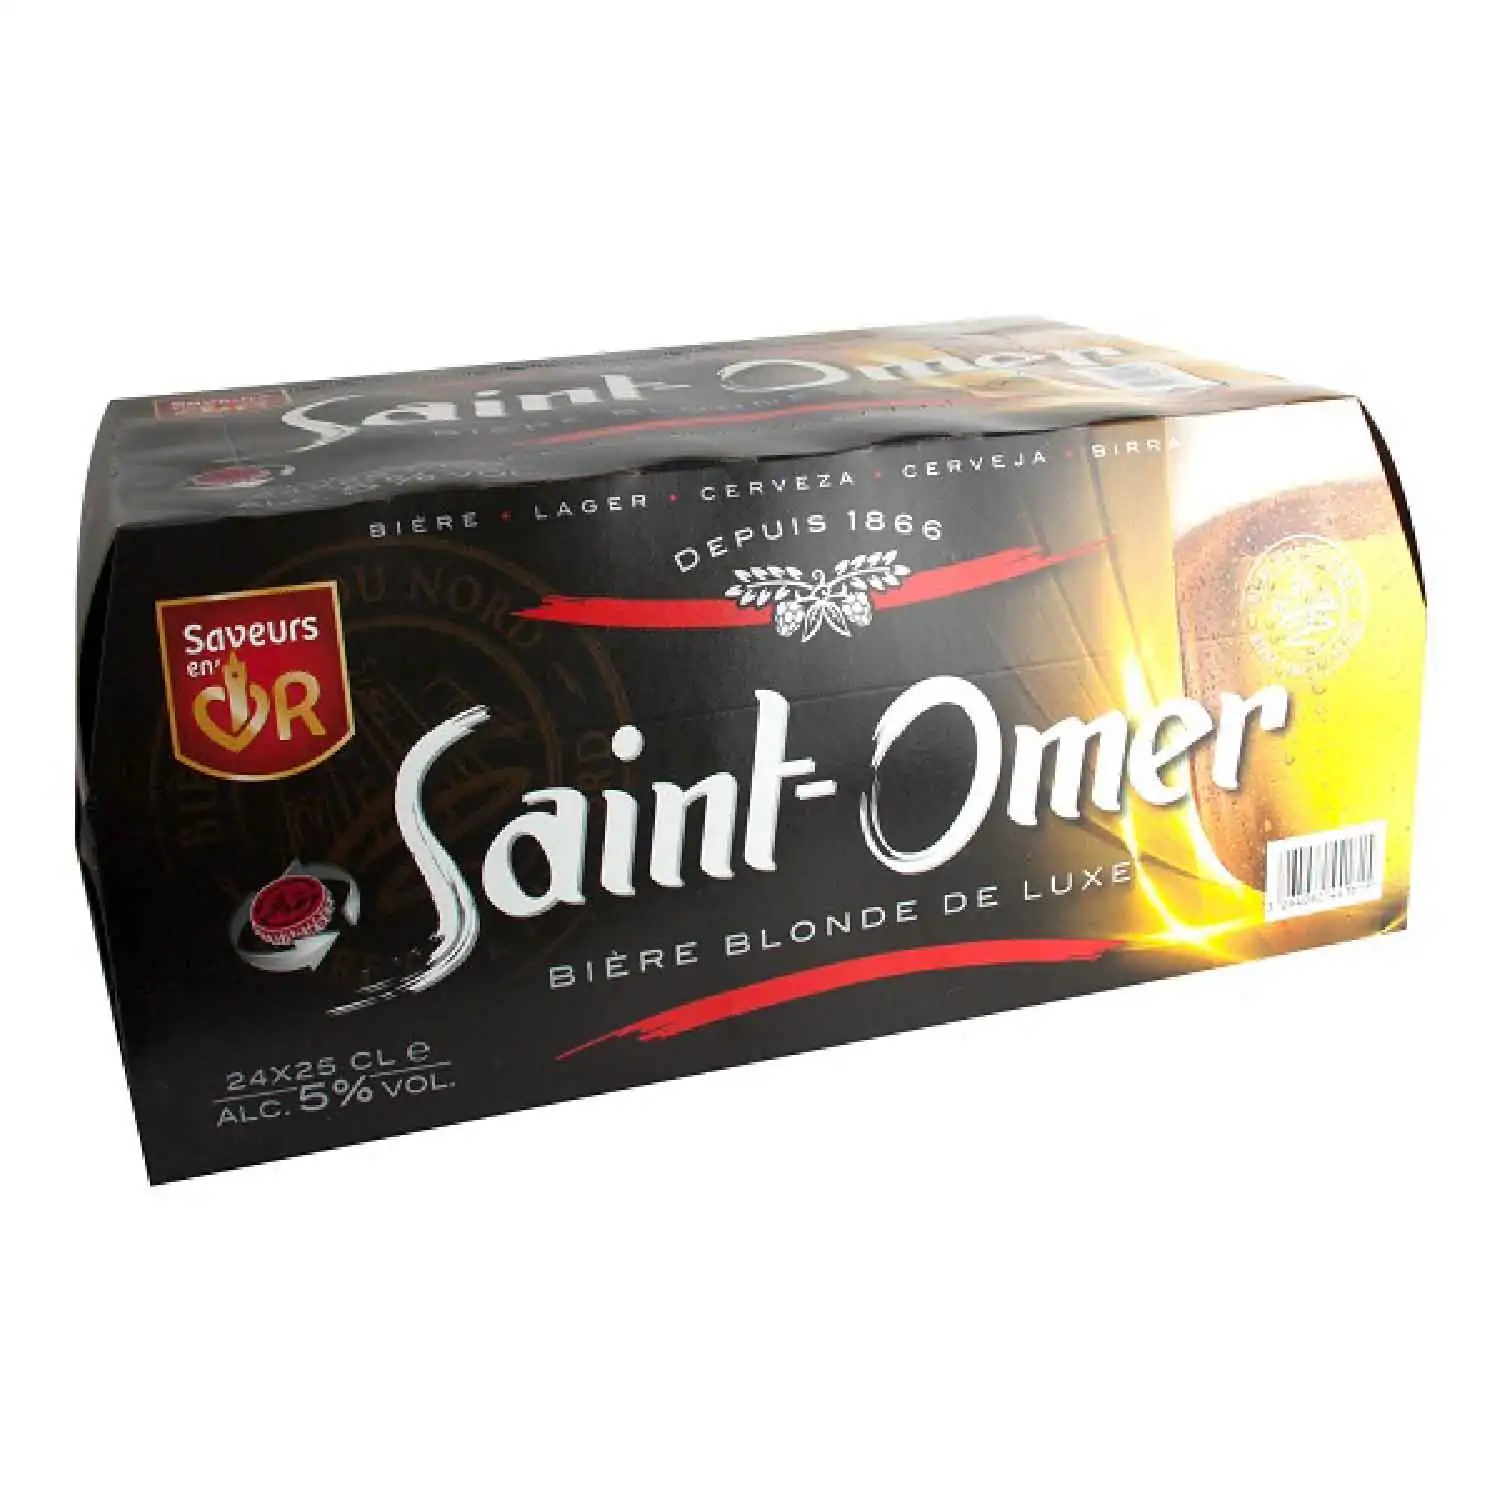 24x Saint-Omer 25cl Alc 5% - Buy at Real Tobacco